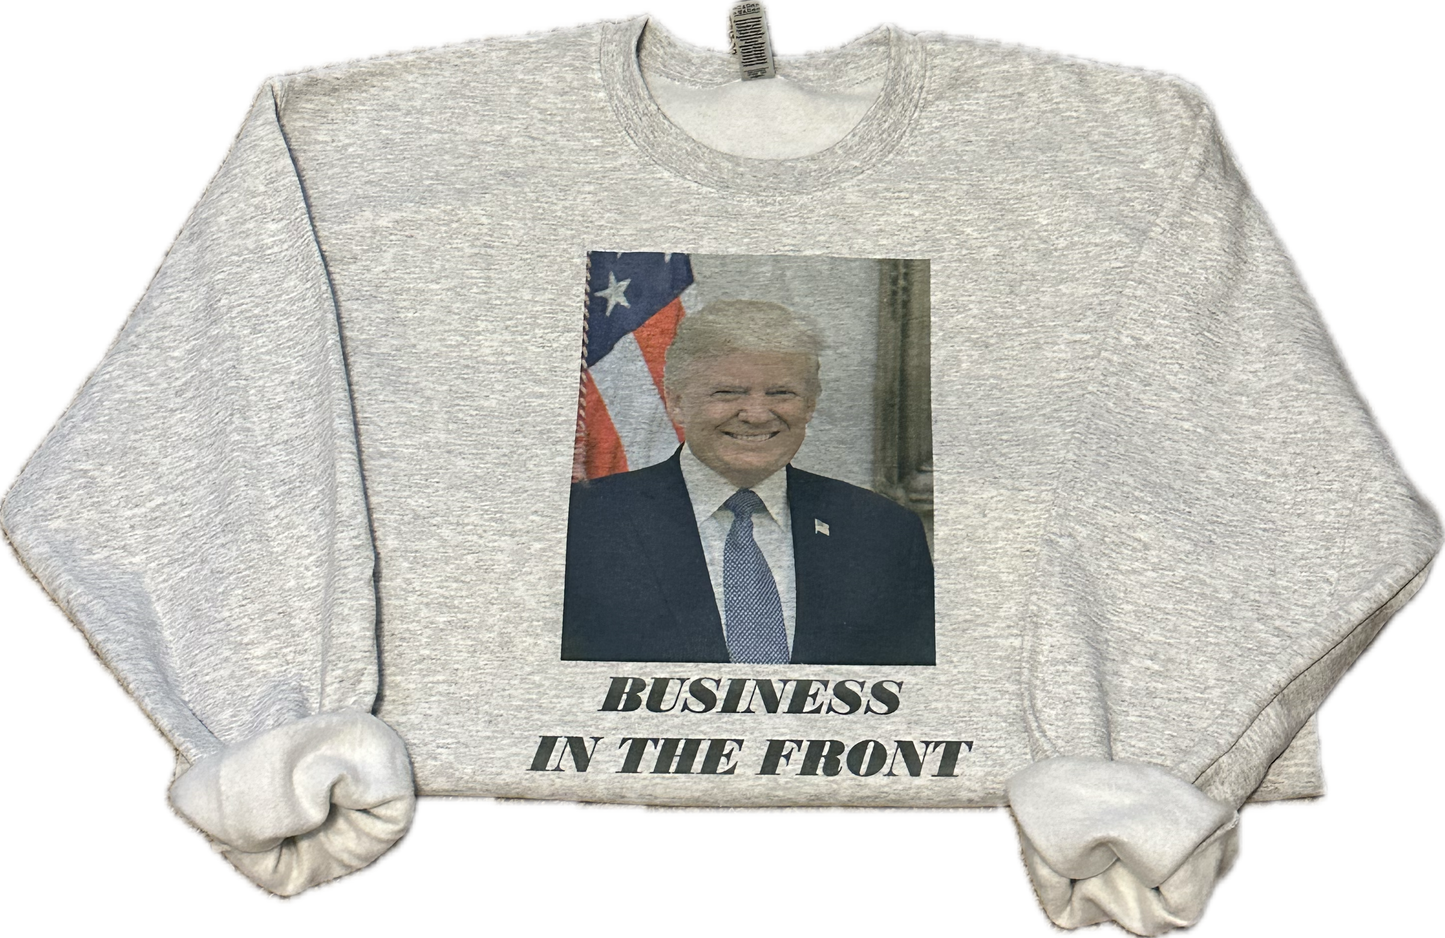 DT BUSINESS IN THE FRONT CREWNECK